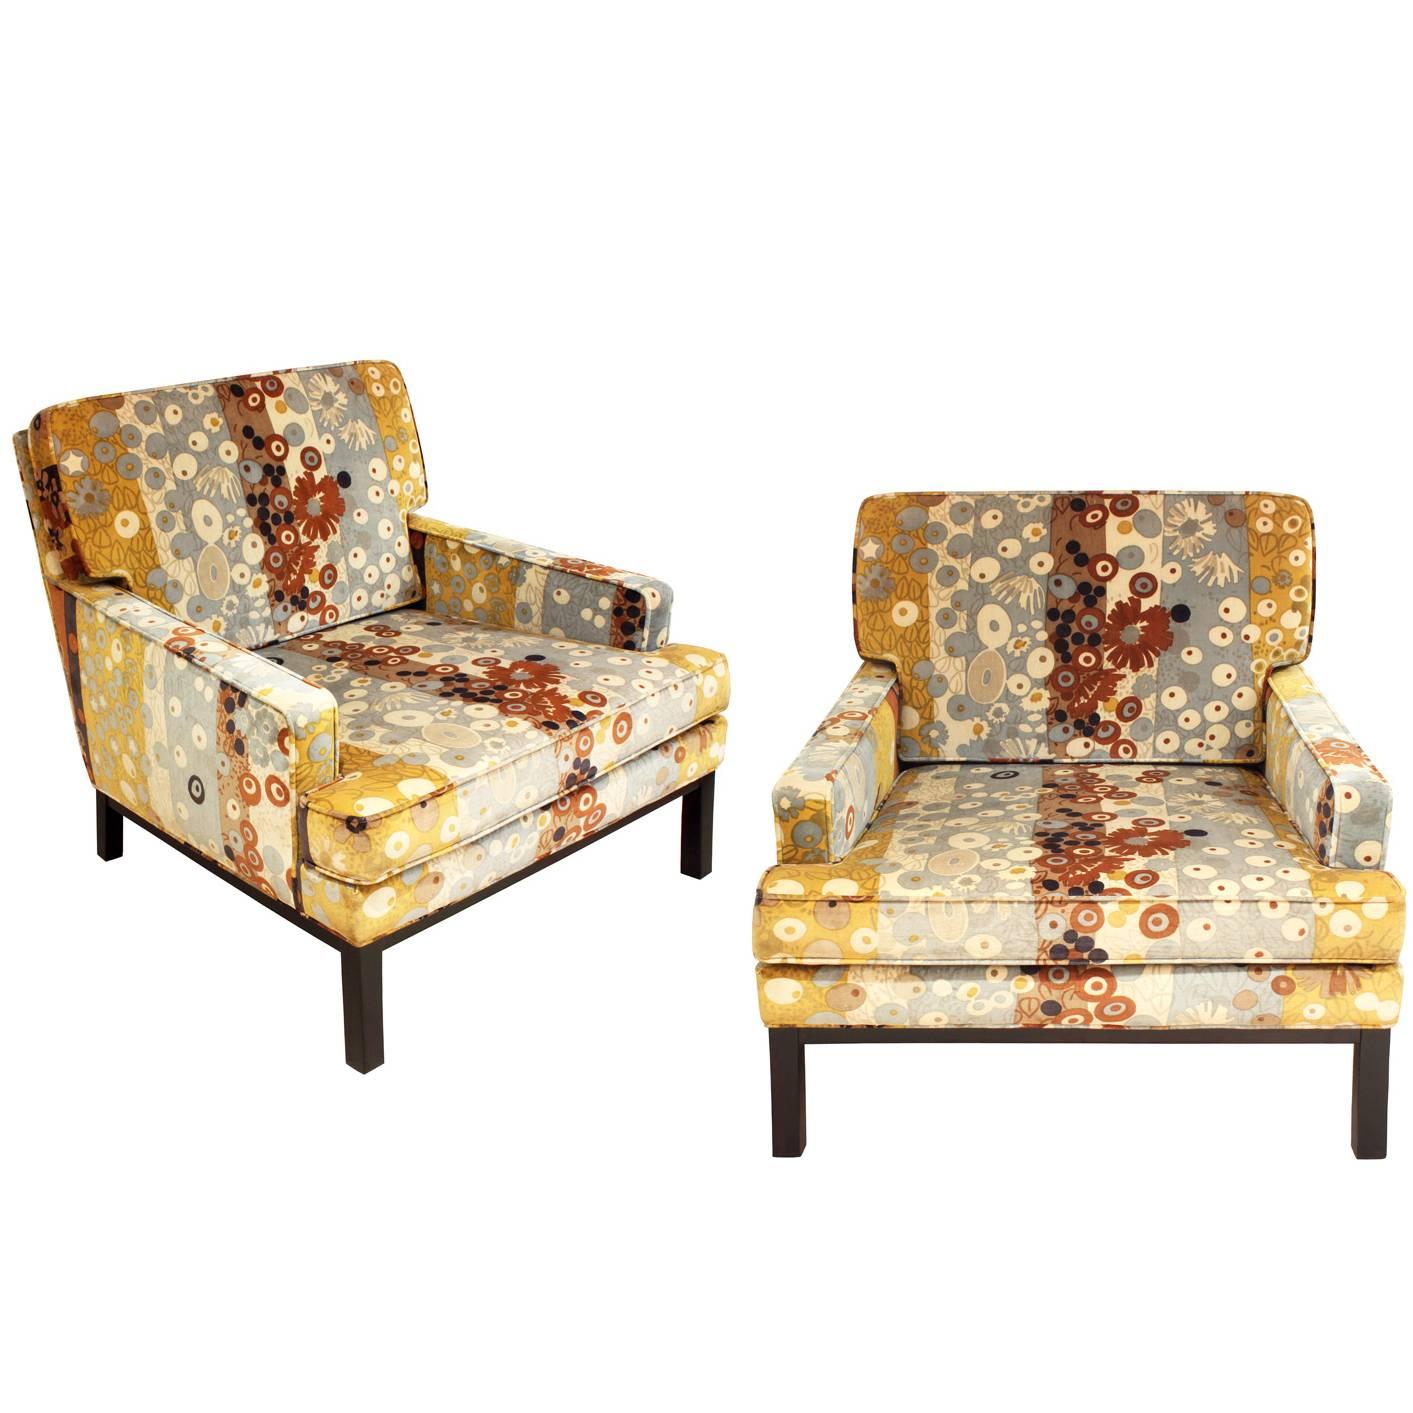 Chic Club Chairs with Jack Lenor Larson Fabric by Paul McCobb